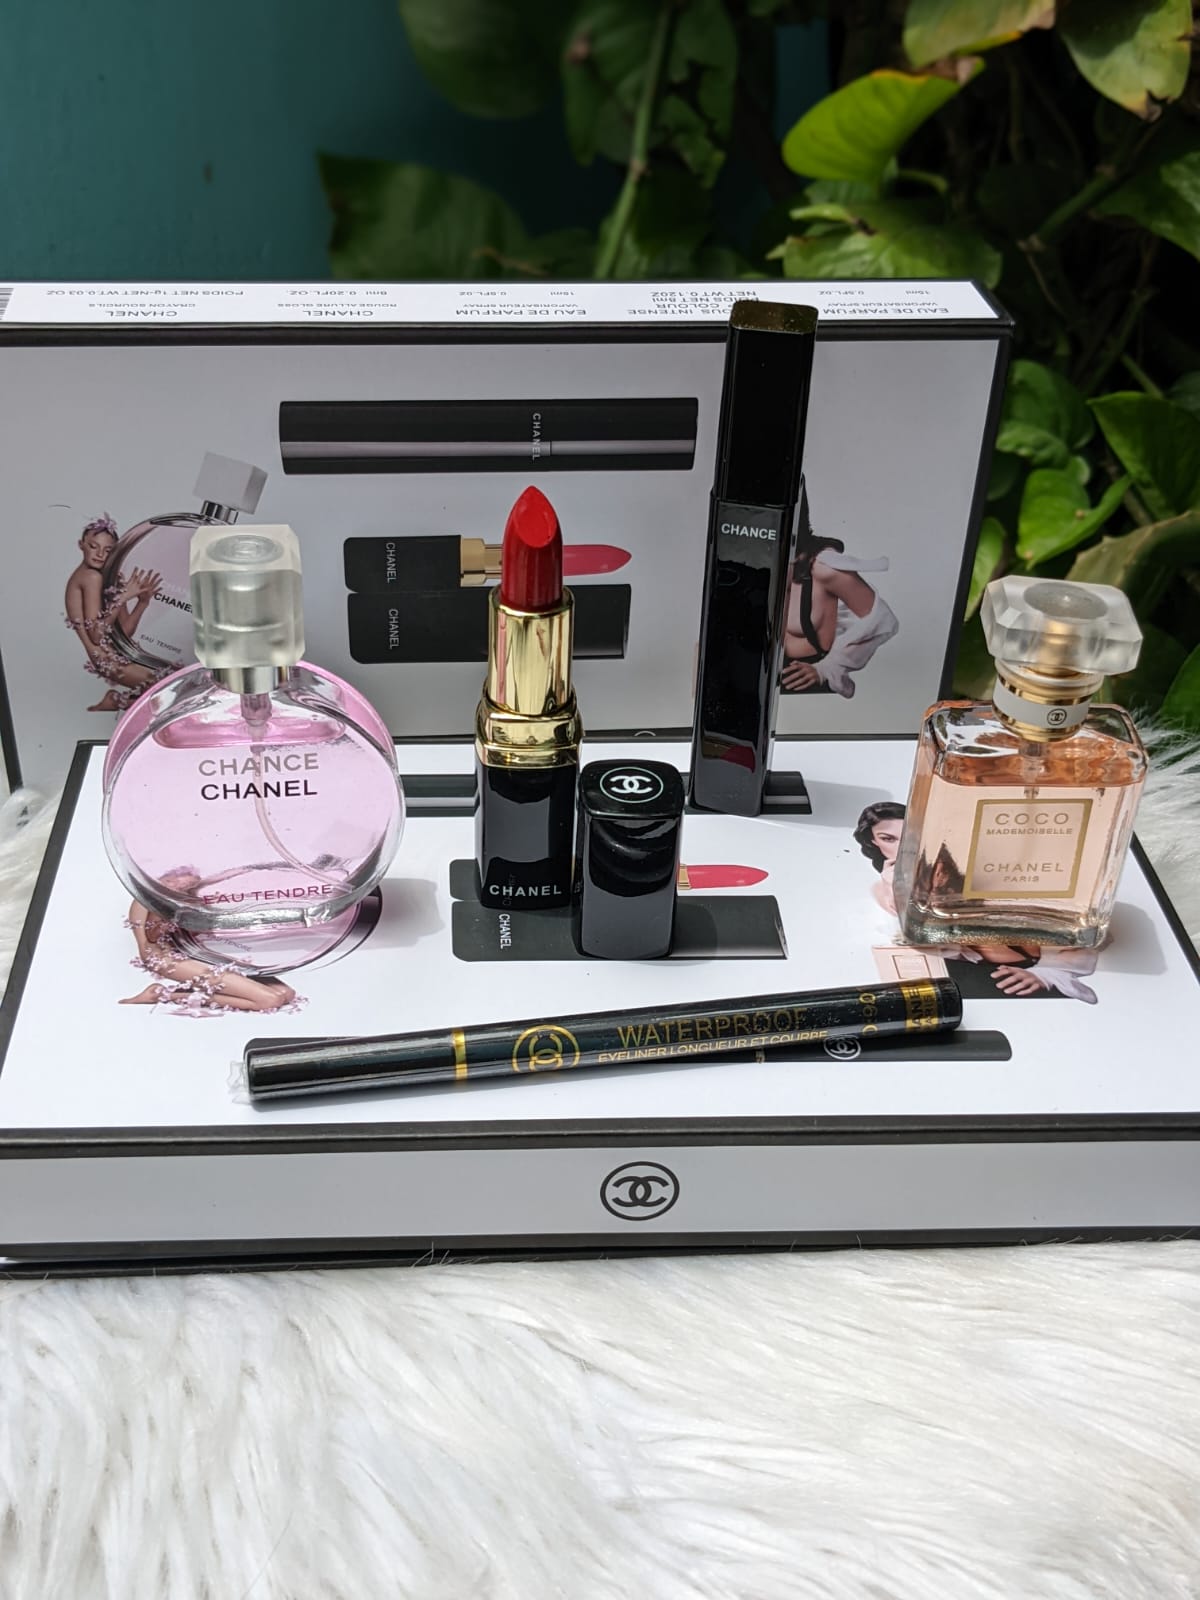 Buy Channel 5 In 1 Gift Set Makeup Perfume Box in Pakistan